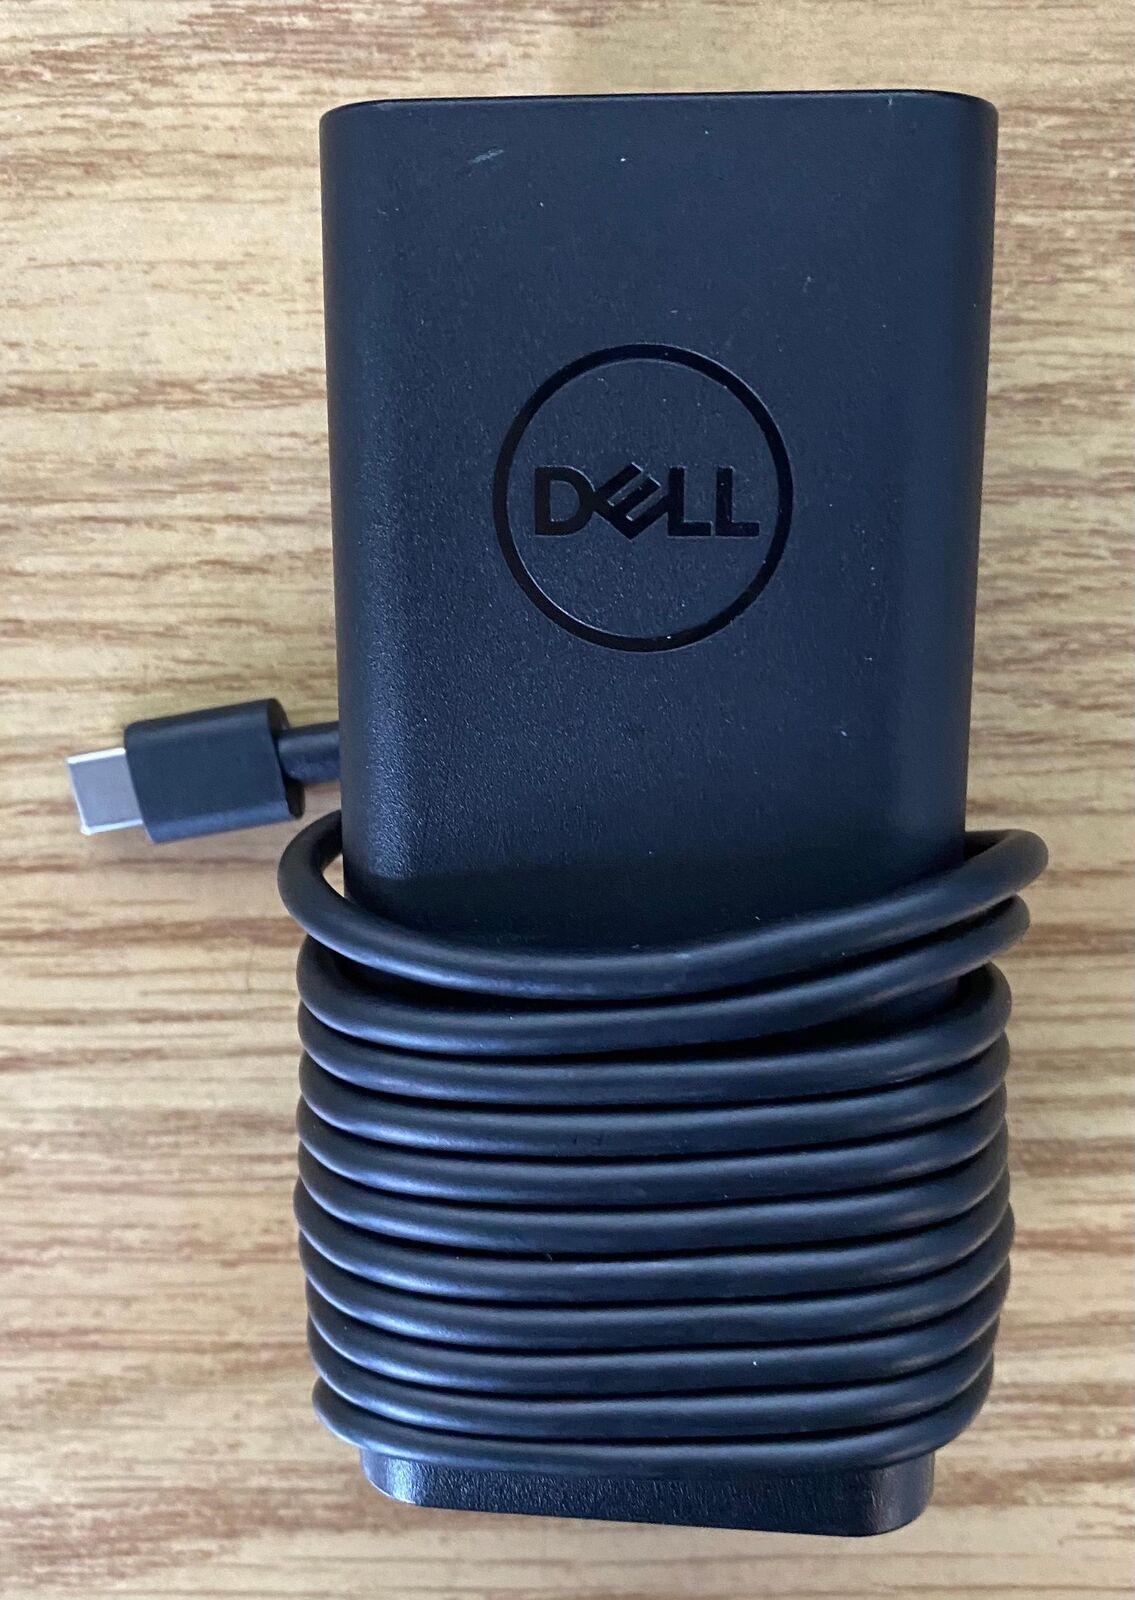 DELL Inspiron 14 5000 5410 P147G 65W Genuine Original AC Power Adapter Charger